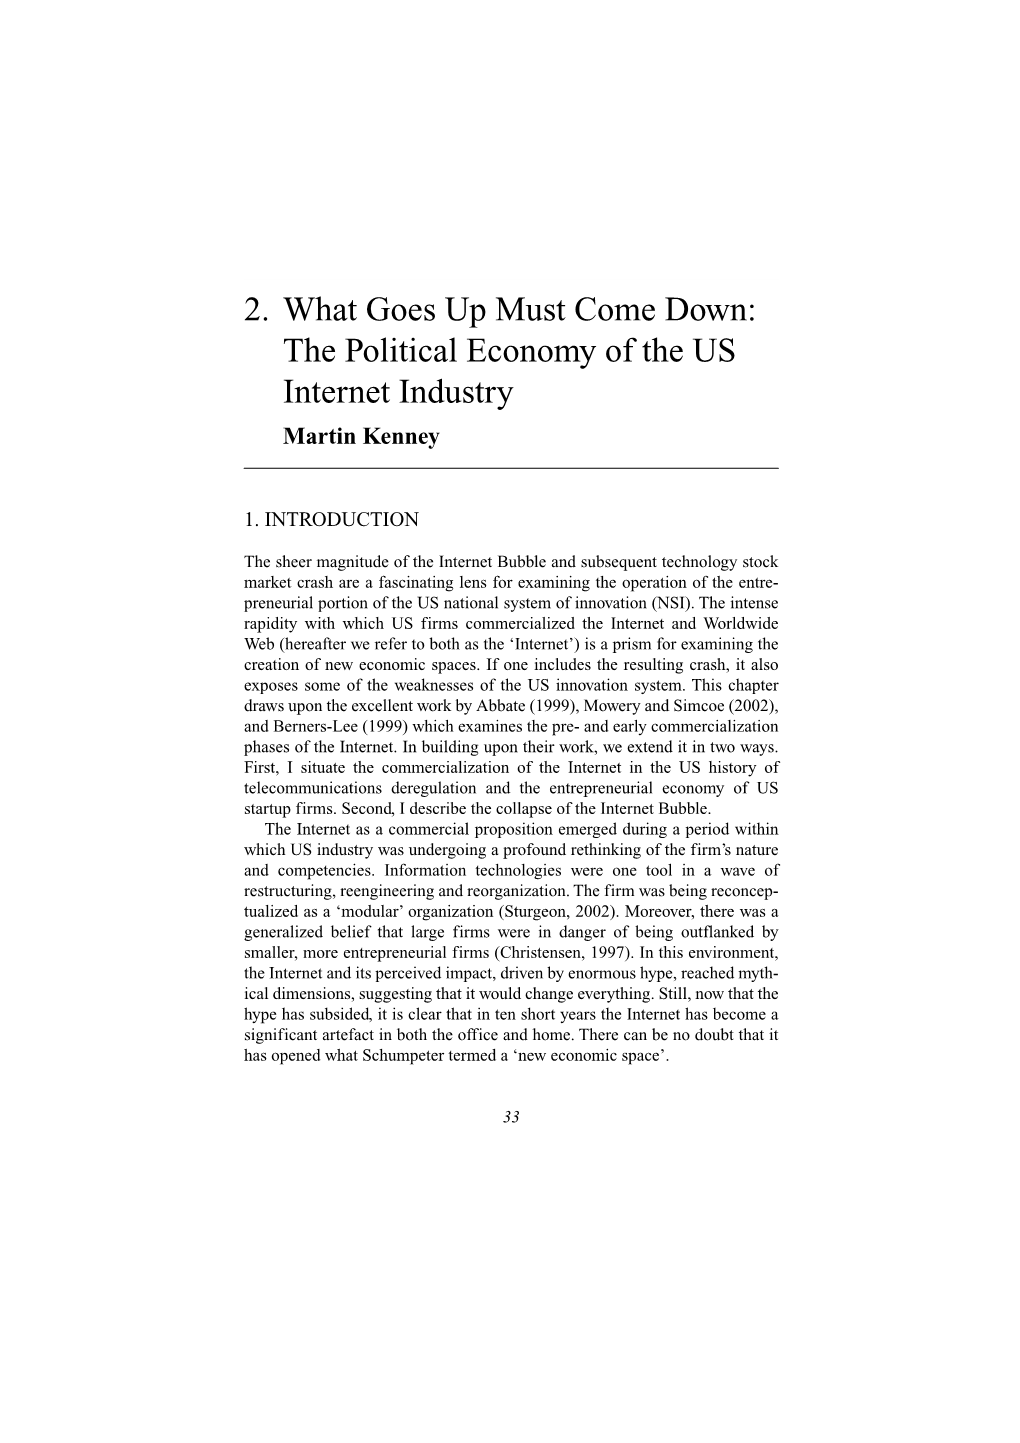 What Goes Up, Must Come Down: the Politics of the U.S. Internet Industry